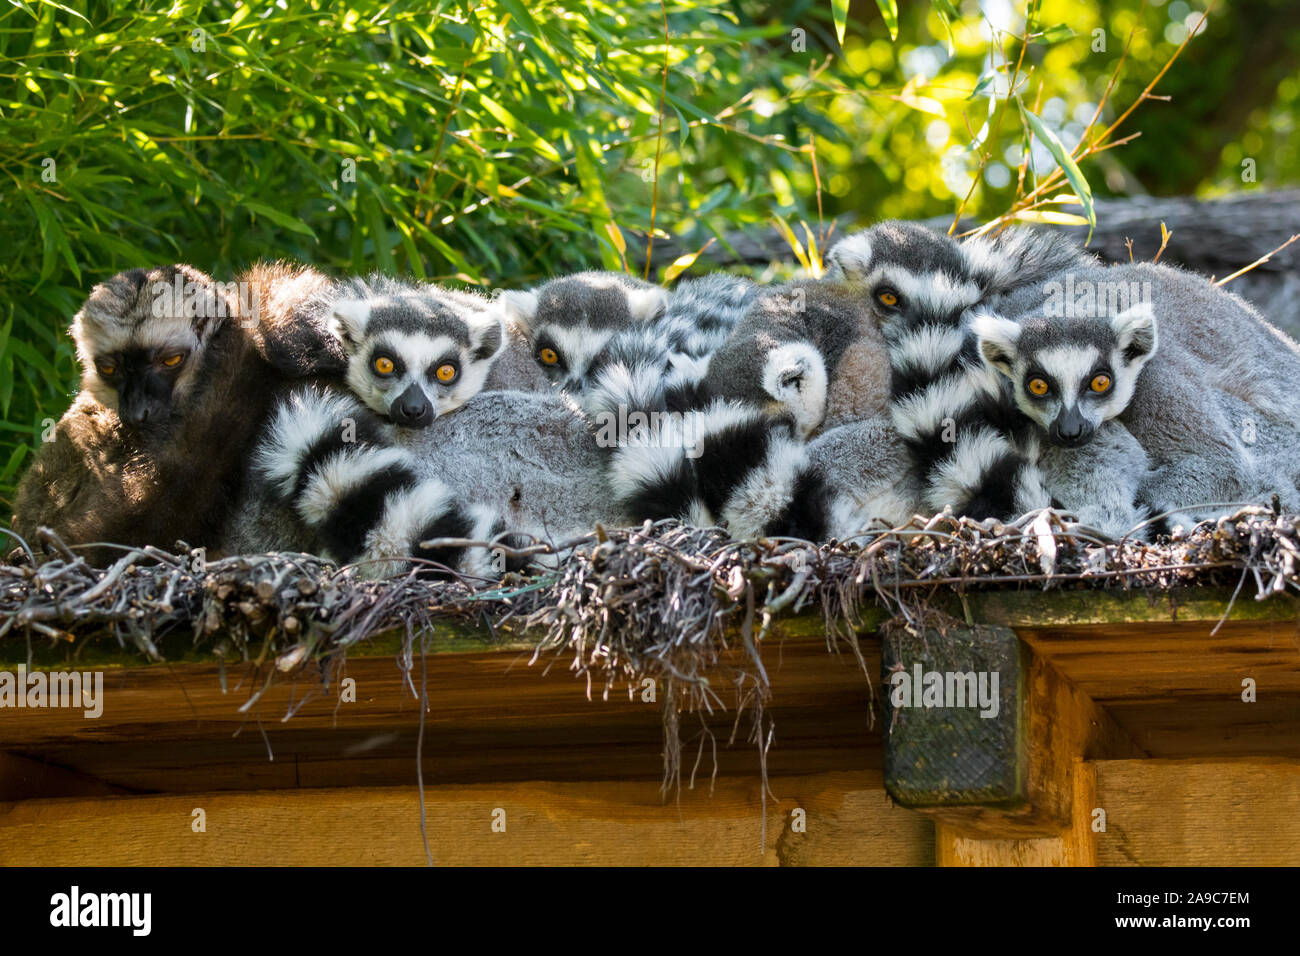 Troop / group of ring-tailed lemurs (Lemur catta) resting of roof, primates native to Madagascar, Africa Stock Photo